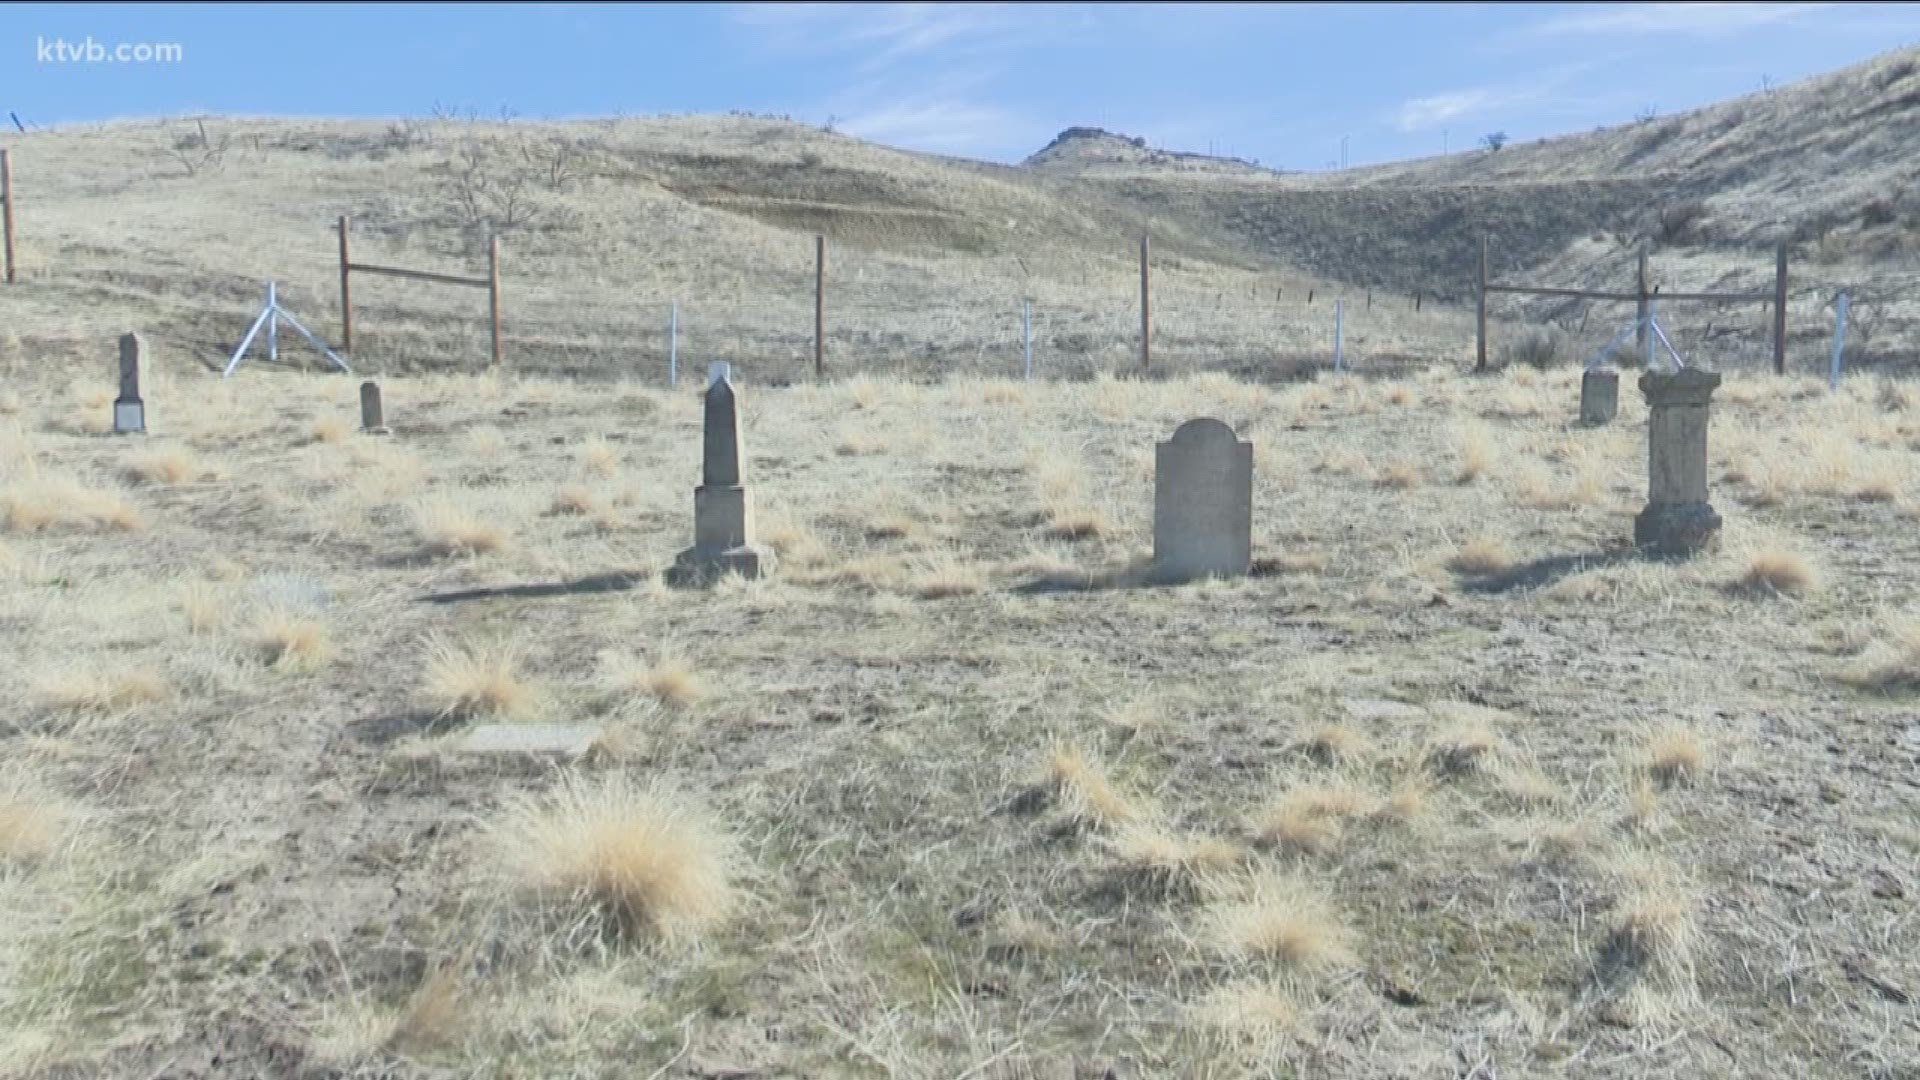 Idaho history experts and the students were attempting to find the remains of inmates buried there, some in unmarked graves.